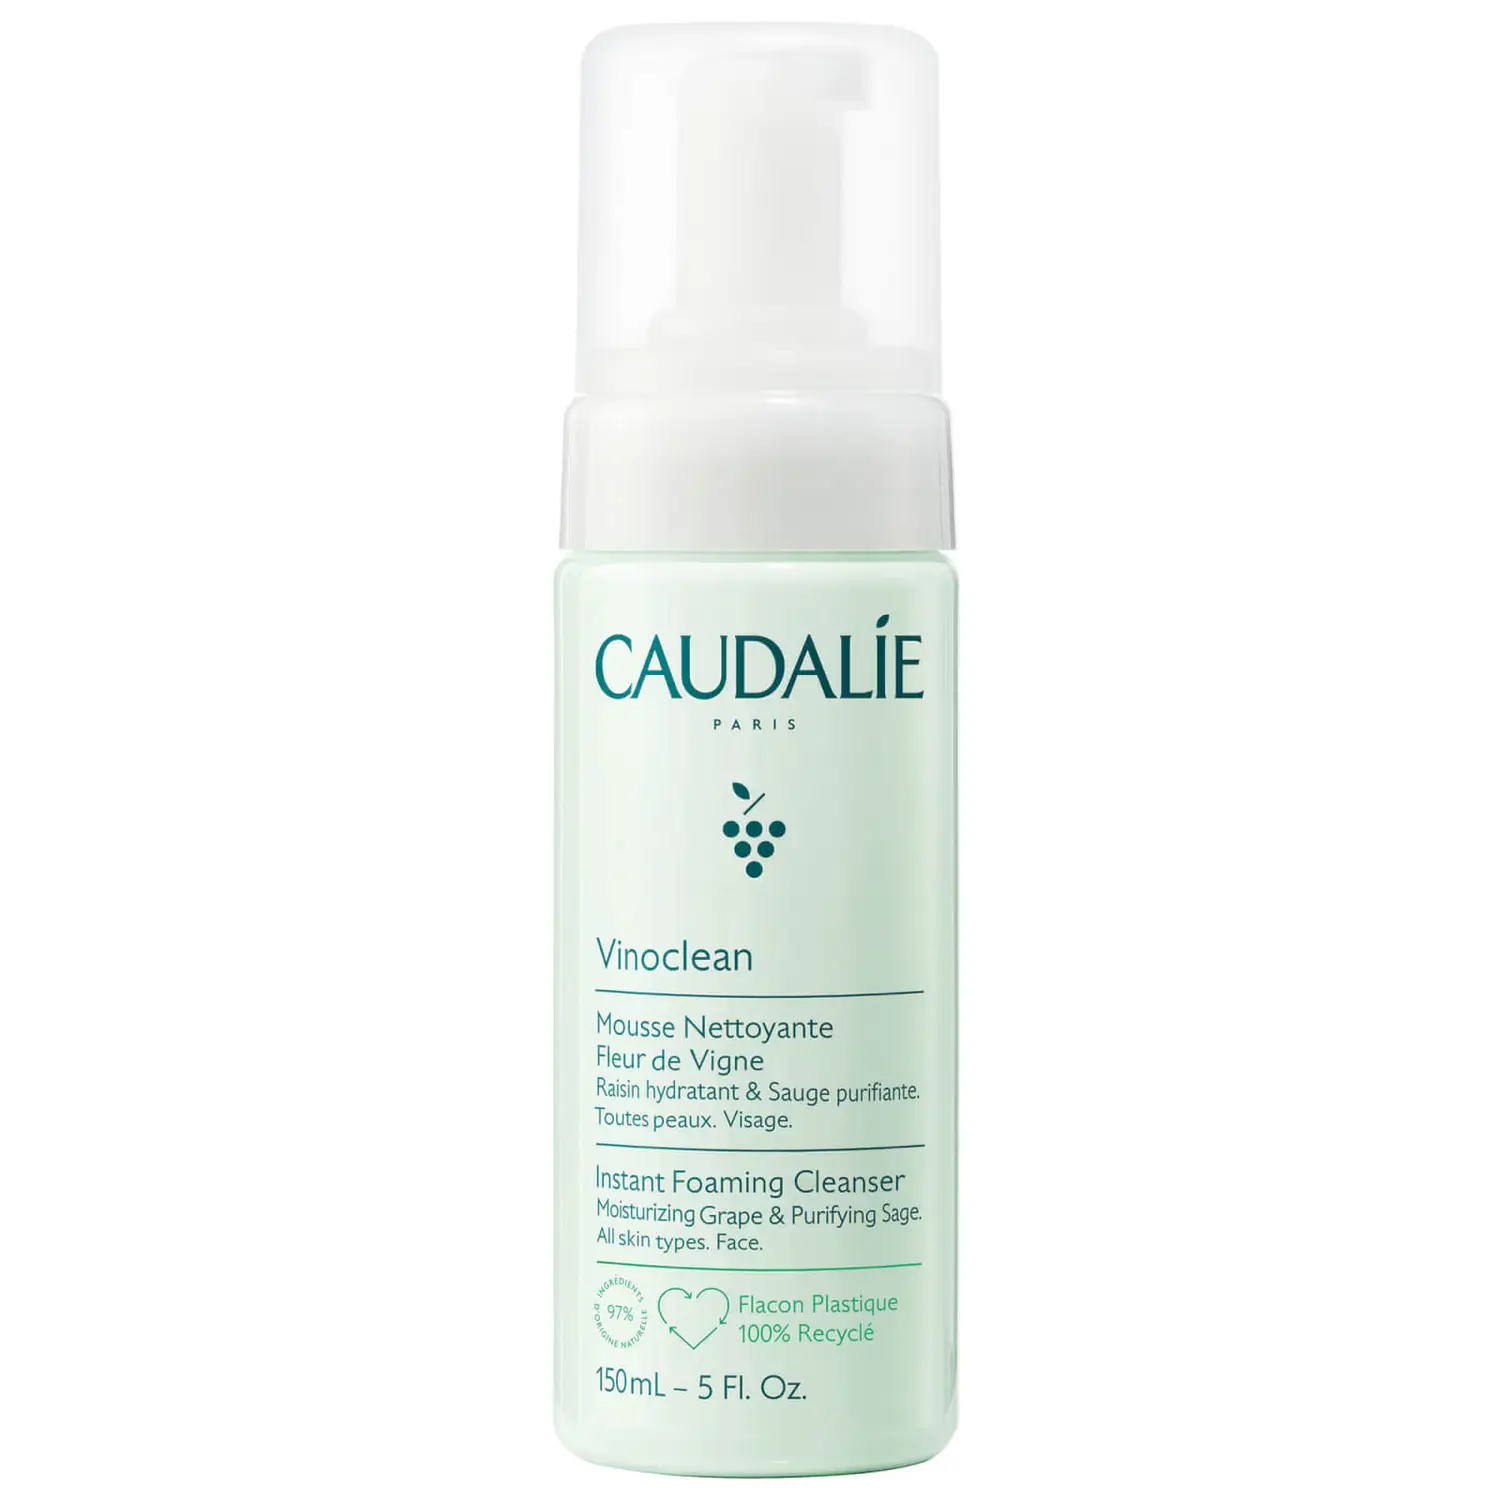  The Power of Grape Extracts in Caudalie Foaming Cleanser for Radiant, Glowing Skin